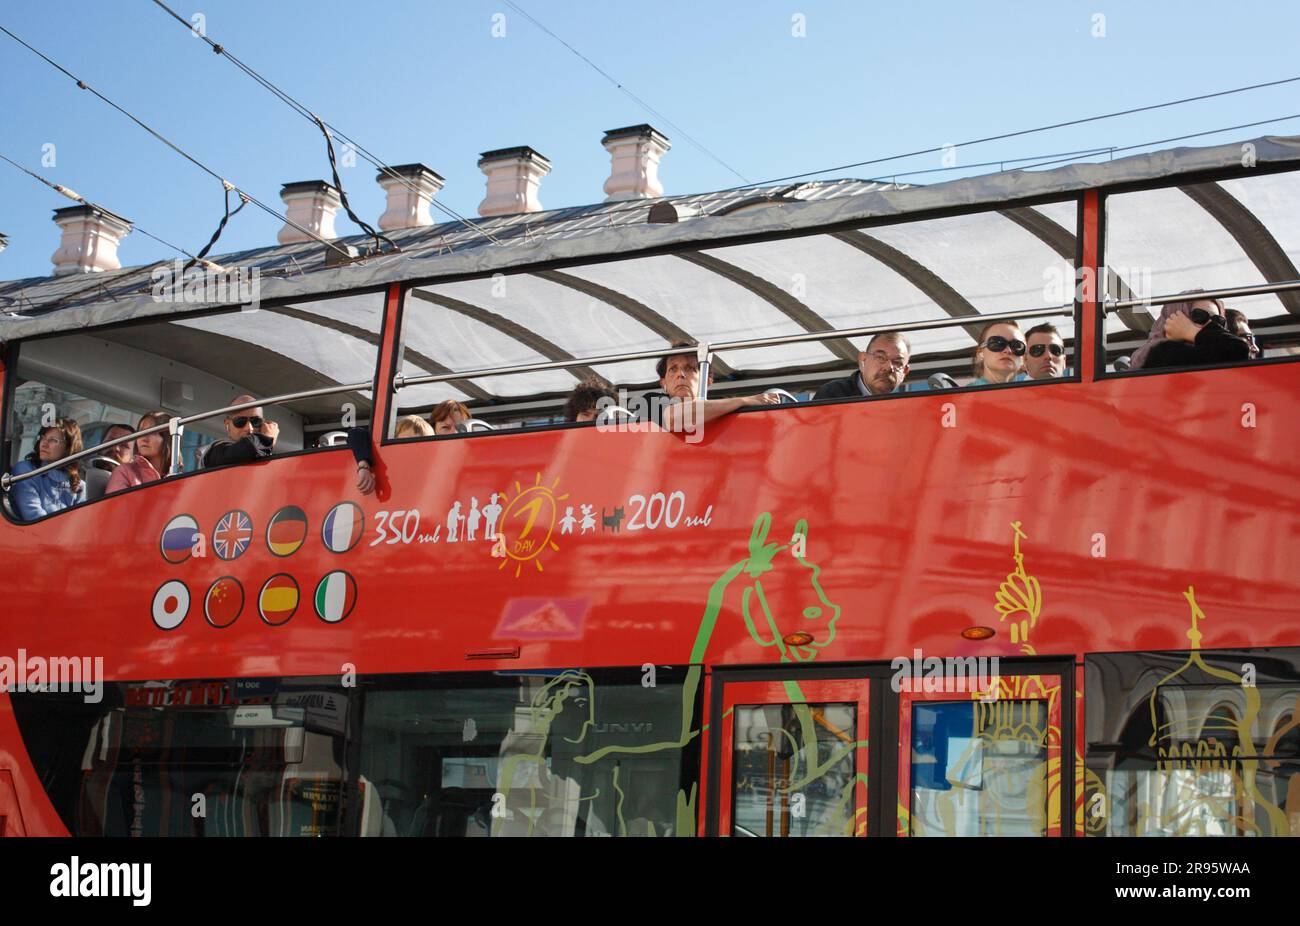 Observation bus in the city against a background of old building roof Stock Photo